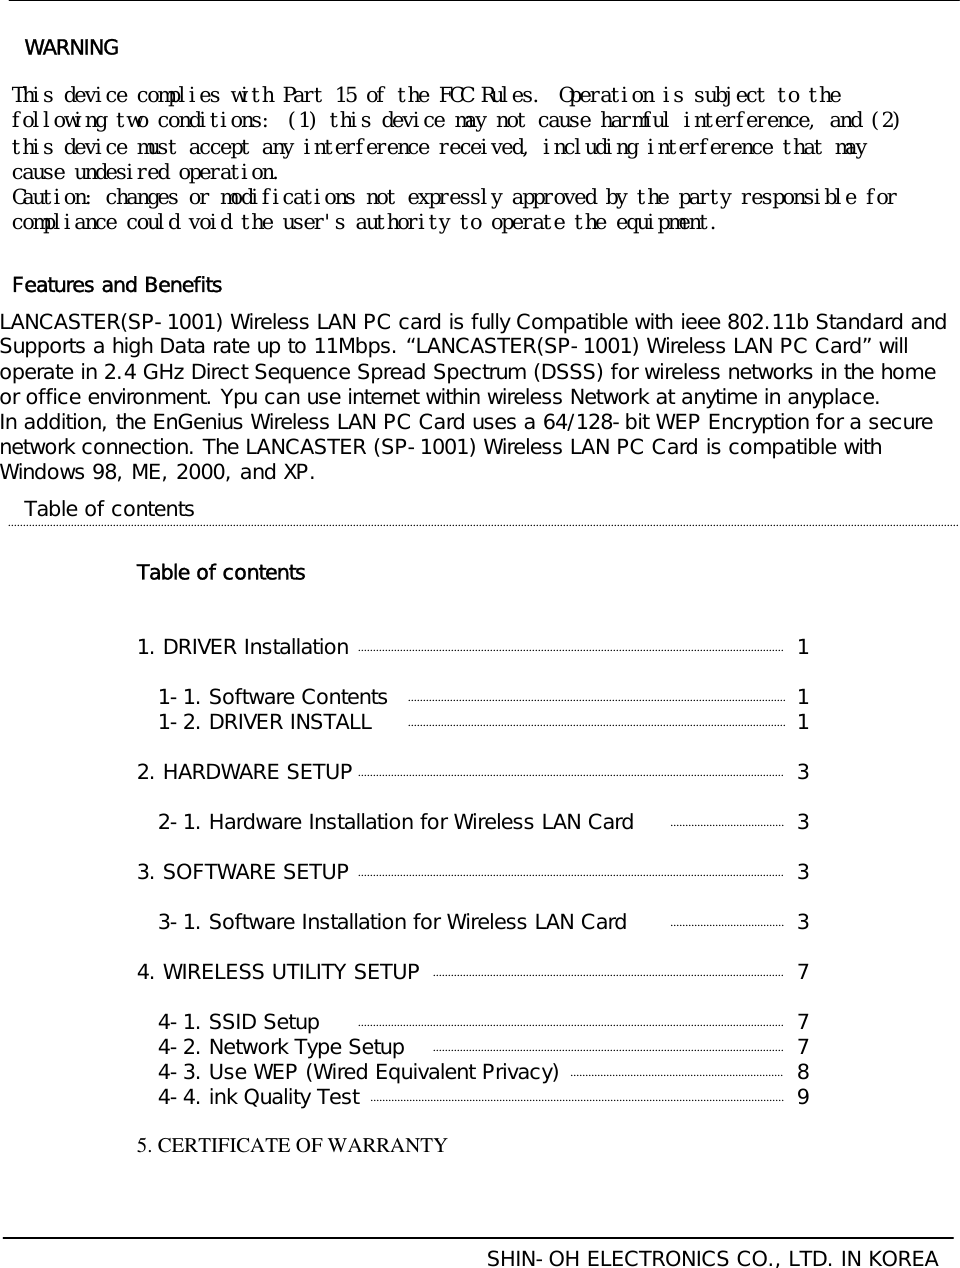 Table of contents1. DRIVER Installation1-1. Software Contents1-2. DRIVER INSTALL2. HARDWARE SETUP2-1. Hardware Installation for Wireless LAN Card3. SOFTWARE SETUP3-1. Software Installation for Wireless LAN Card4. WIRELESS UTILITY SETUP4-1. SSID Setup4-2. Network Type Setup4-3. Use WEP (Wired Equivalent Privacy)4-4. ink Quality Test5. CERTIFICATE OF WARRANTYTable of contentsSHIN-OH ELECTRONICS CO., LTD. IN KOREA111333377789LANCASTER(SP-1001) Wireless LAN PC card is fully Compatible with ieee 802.11b Standard and Supports a high Data rate up to 11Mbps. “LANCASTER(SP-1001) Wireless LAN PC Card”willoperate in 2.4 GHz Direct Sequence Spread Spectrum (DSSS) for wireless networks in the home or office environment. Ypu can use internet within wireless Network at anytime in anyplace.In addition, the EnGenius Wireless LAN PC Card uses a 64/128-bit WEP Encryption for a secure network connection. The LANCASTER (SP-1001) Wireless LAN PC Card is compatible with Windows 98, ME, 2000, and XP.Features and BenefitsThis󰚟device󰚟complies󰚟with󰚟Part󰚟15󰚟of󰚟the󰚟FCC󰚟Rules. Operation󰚟is󰚟subject󰚟to󰚟the󰚟following󰚟two󰚟conditions: (1)󰚟this󰚟device󰚟may󰚟not󰚟cause󰚟harmful󰚟interference,󰚟and󰚟(2)󰚟this󰚟device󰚟must󰚟accept󰚟any󰚟interference󰚟received,󰚟including󰚟interference󰚟that󰚟may󰚟cause󰚟undesired󰚟operation.Caution:󰚟changes󰚟or󰚟modifications󰚟not󰚟expressly󰚟approved󰚟by󰚟the󰚟party󰚟responsible󰚟for󰚟compliance󰚟could󰚟void󰚟the󰚟user&apos;s󰚟authority󰚟to󰚟operate󰚟the󰚟equipment.WARNING